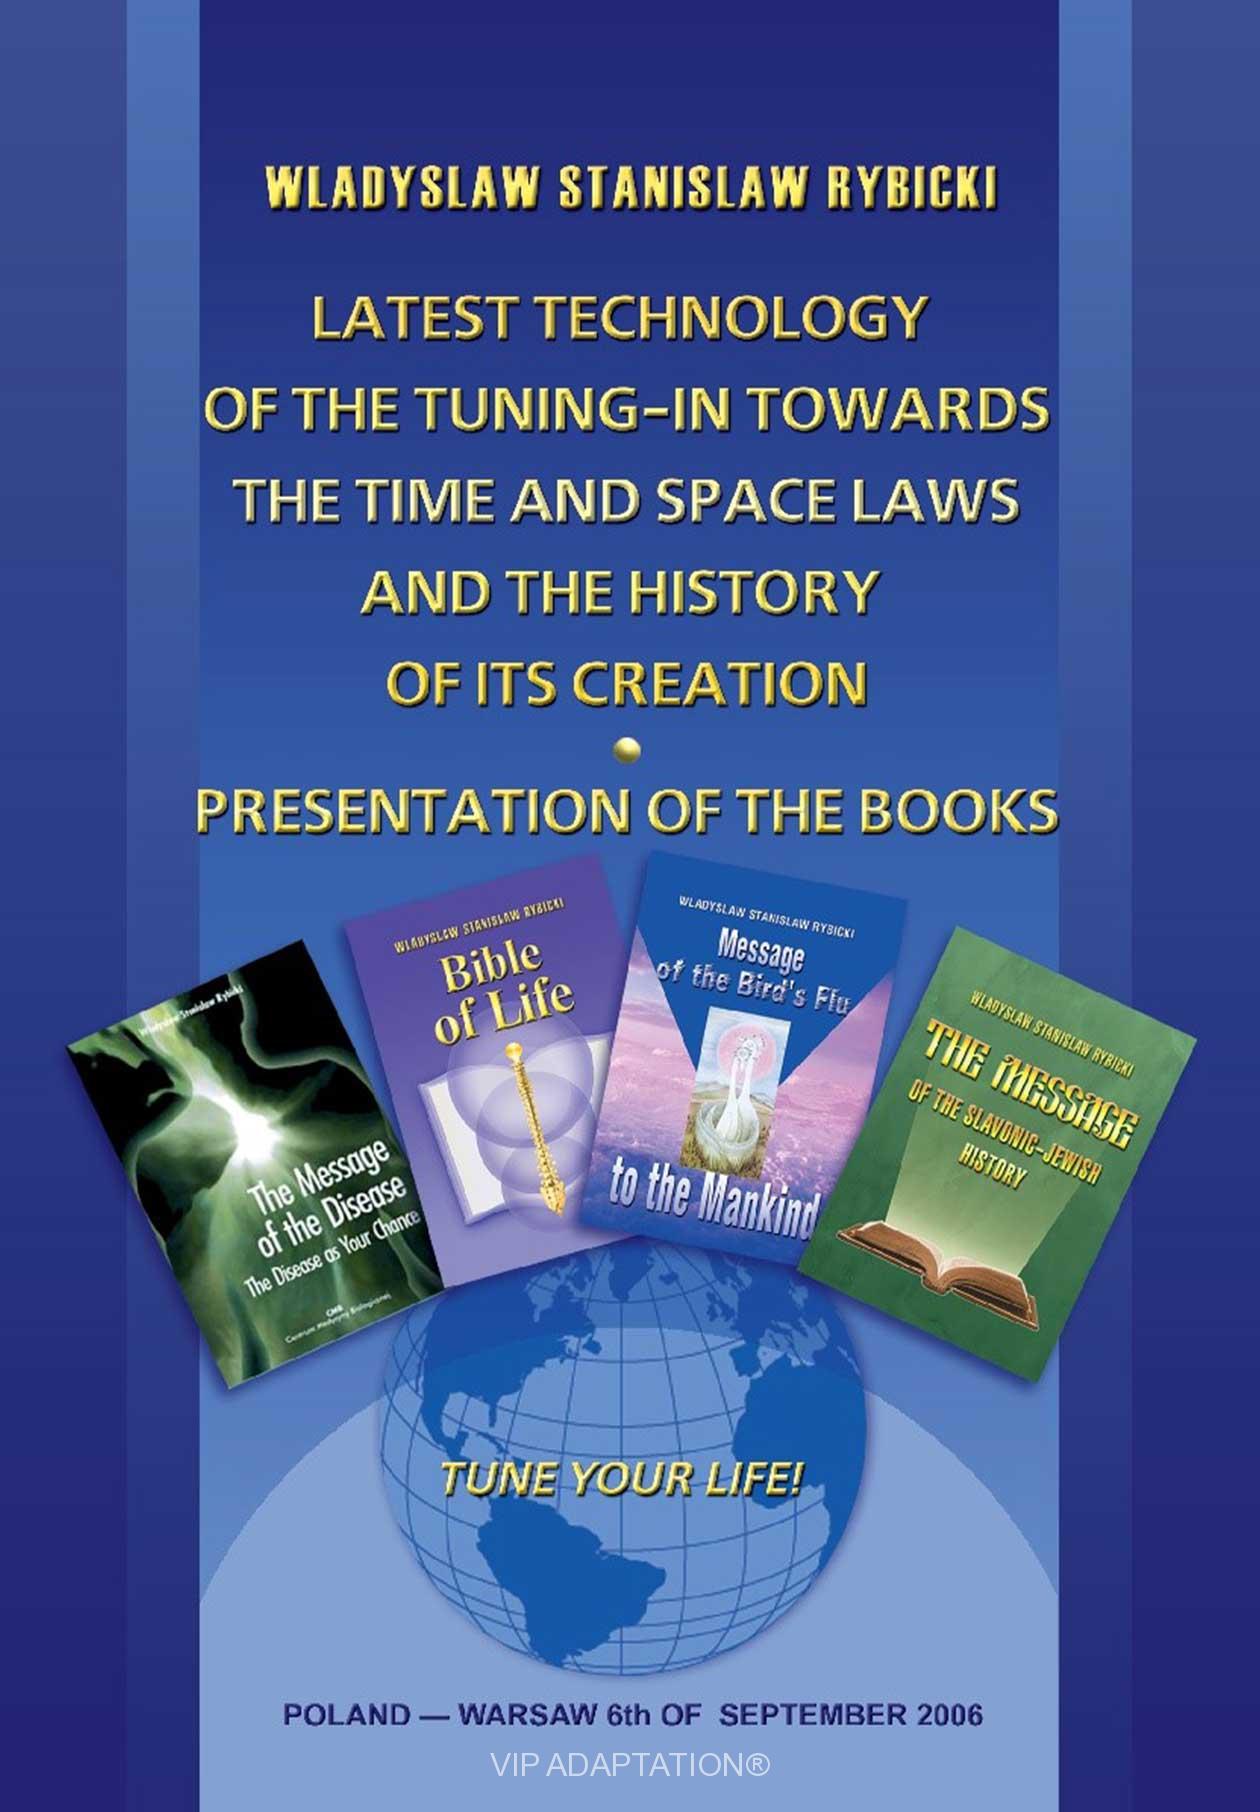 Latest technology of the tunung-in towards the time and space laws and the history of its creation